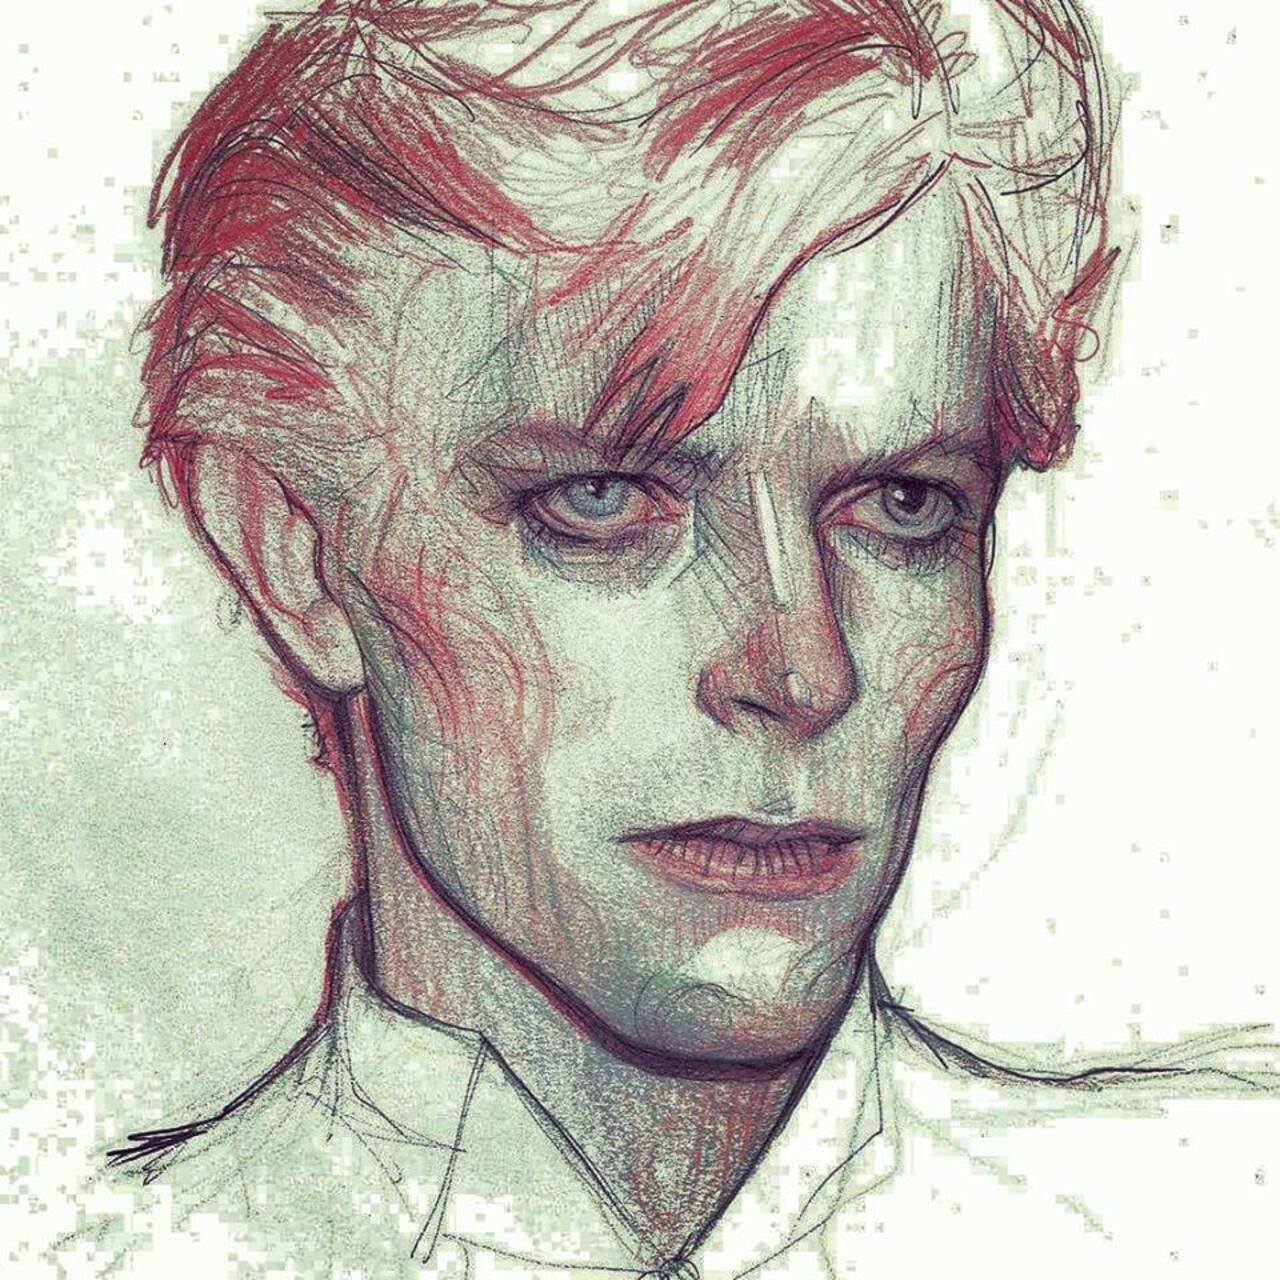 The Man Who Fell To Earth #DavidBowie #art #sketching by @subversivegirl https://t.co/GhV88PTCHT